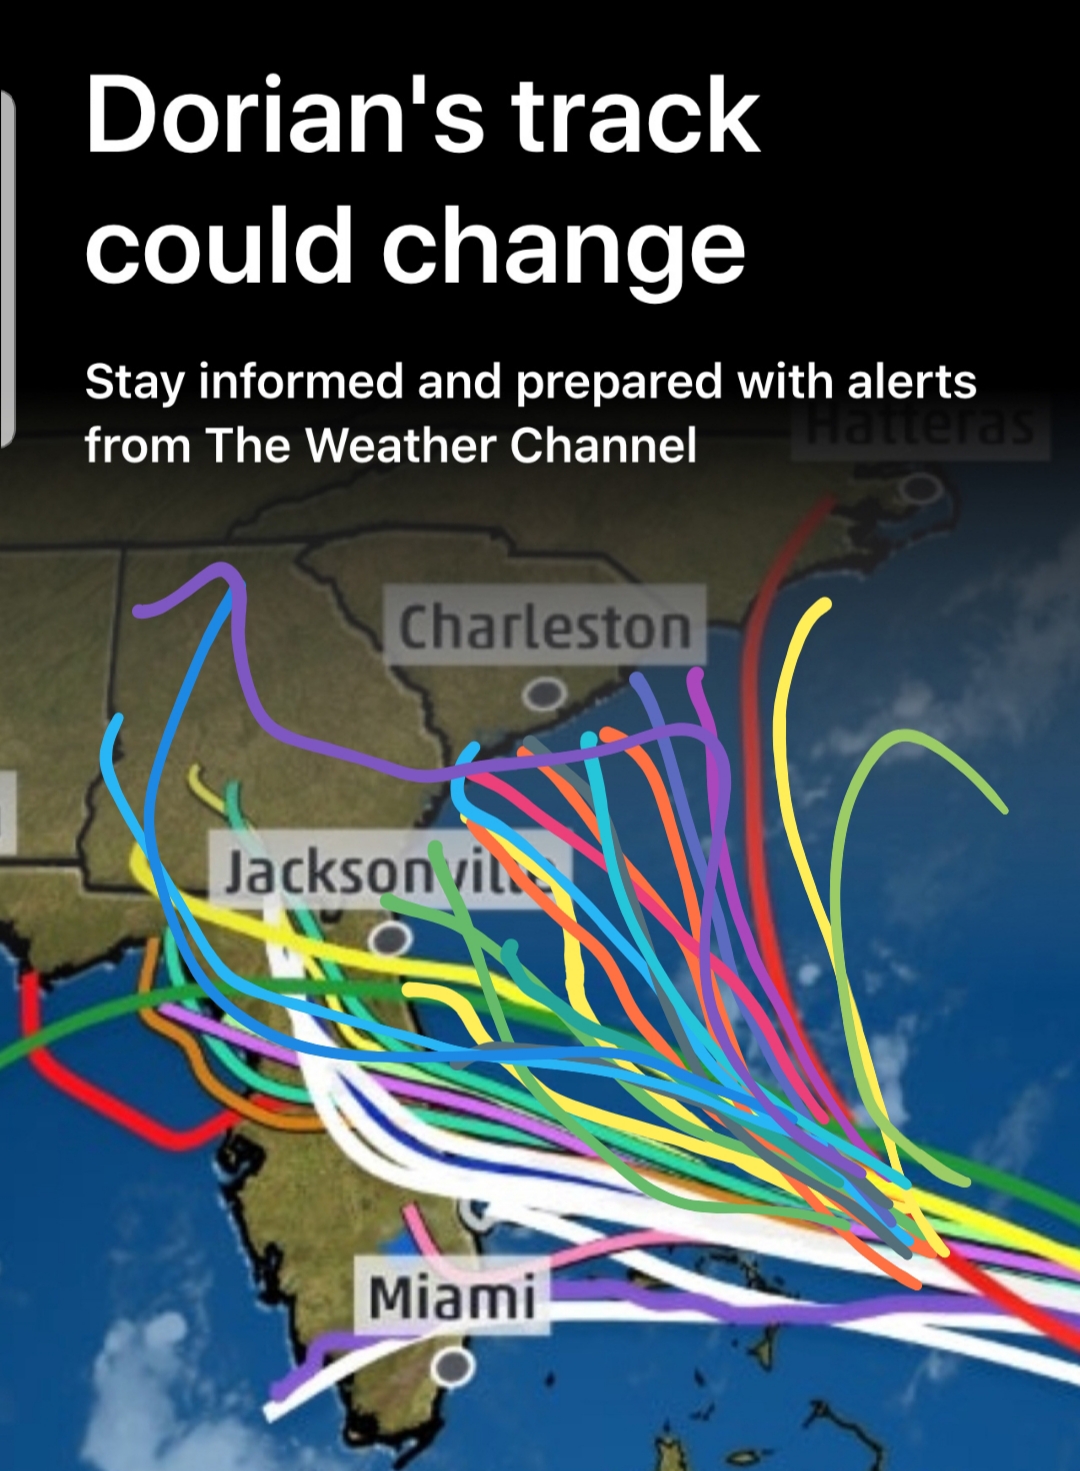 Hurricane Dorian Florida meme - general communication inc. - Dorian's track could change Stay informed and prepared with alerts from The Weather Channel Charleston Jacksonvil Miami